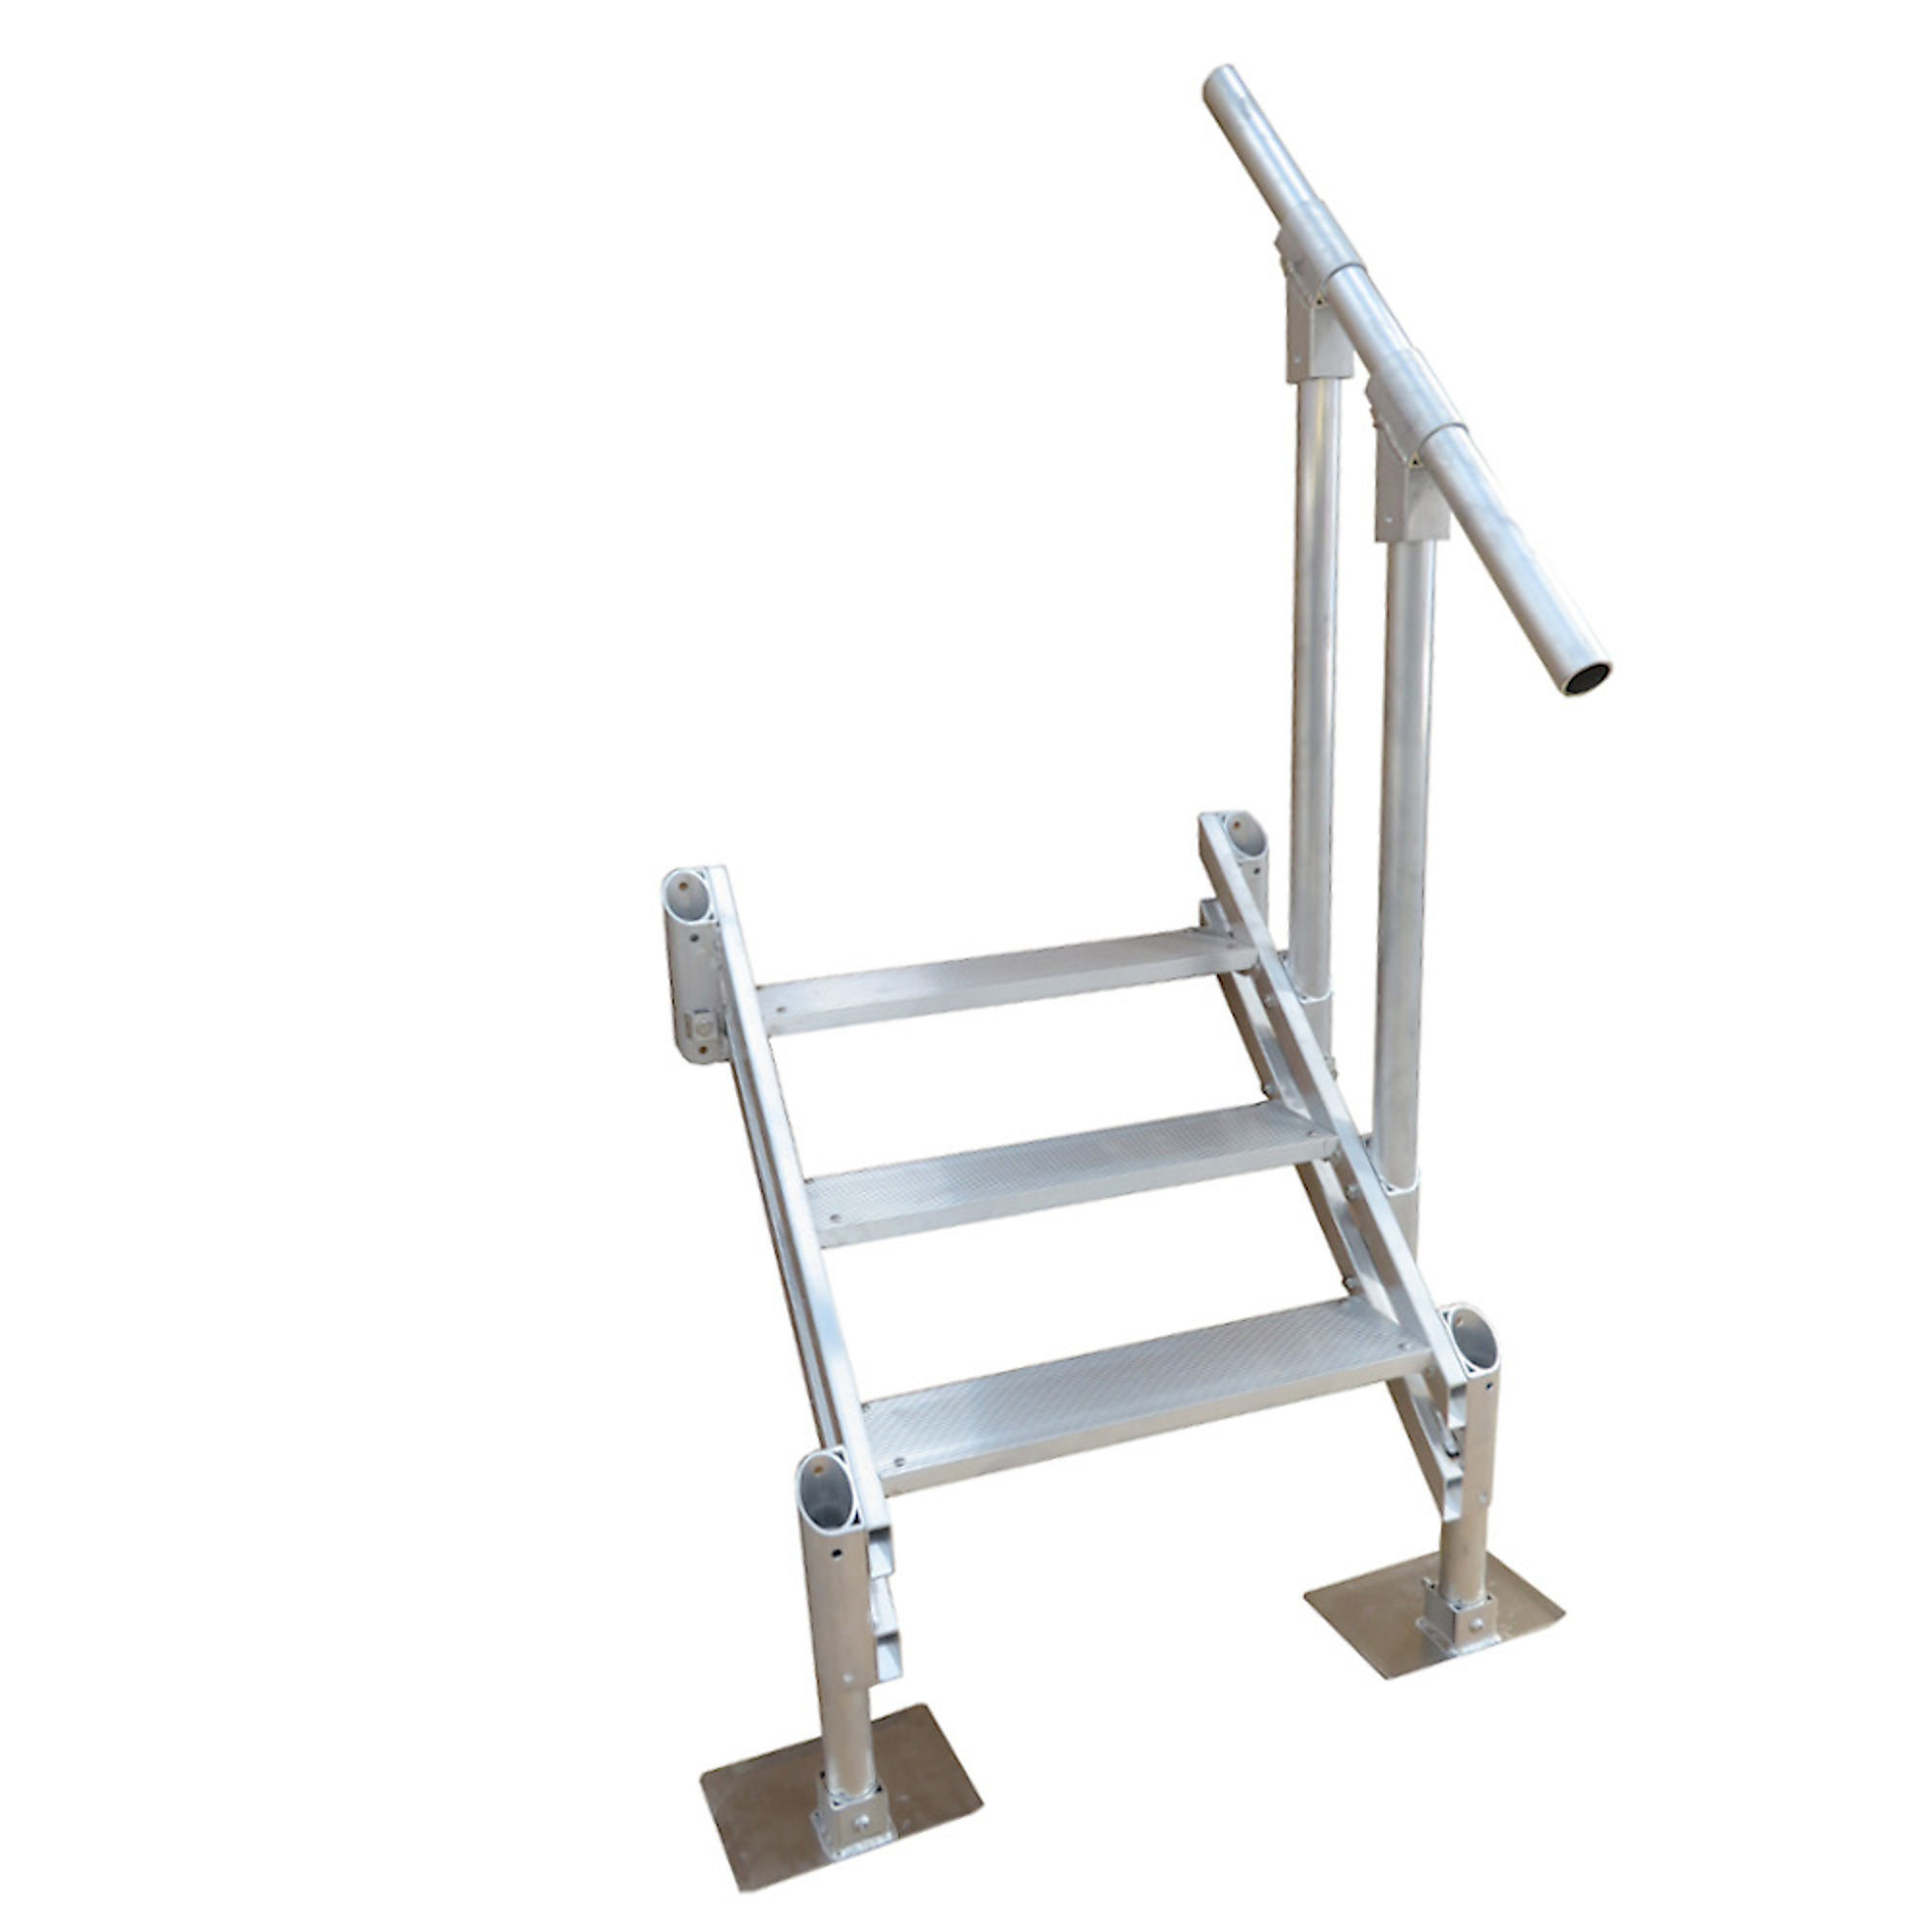 Patriot Docks, Marine Stairs, 3 Step, Product Type Ladder, Length 48 in, Width 24 in, Model 10923